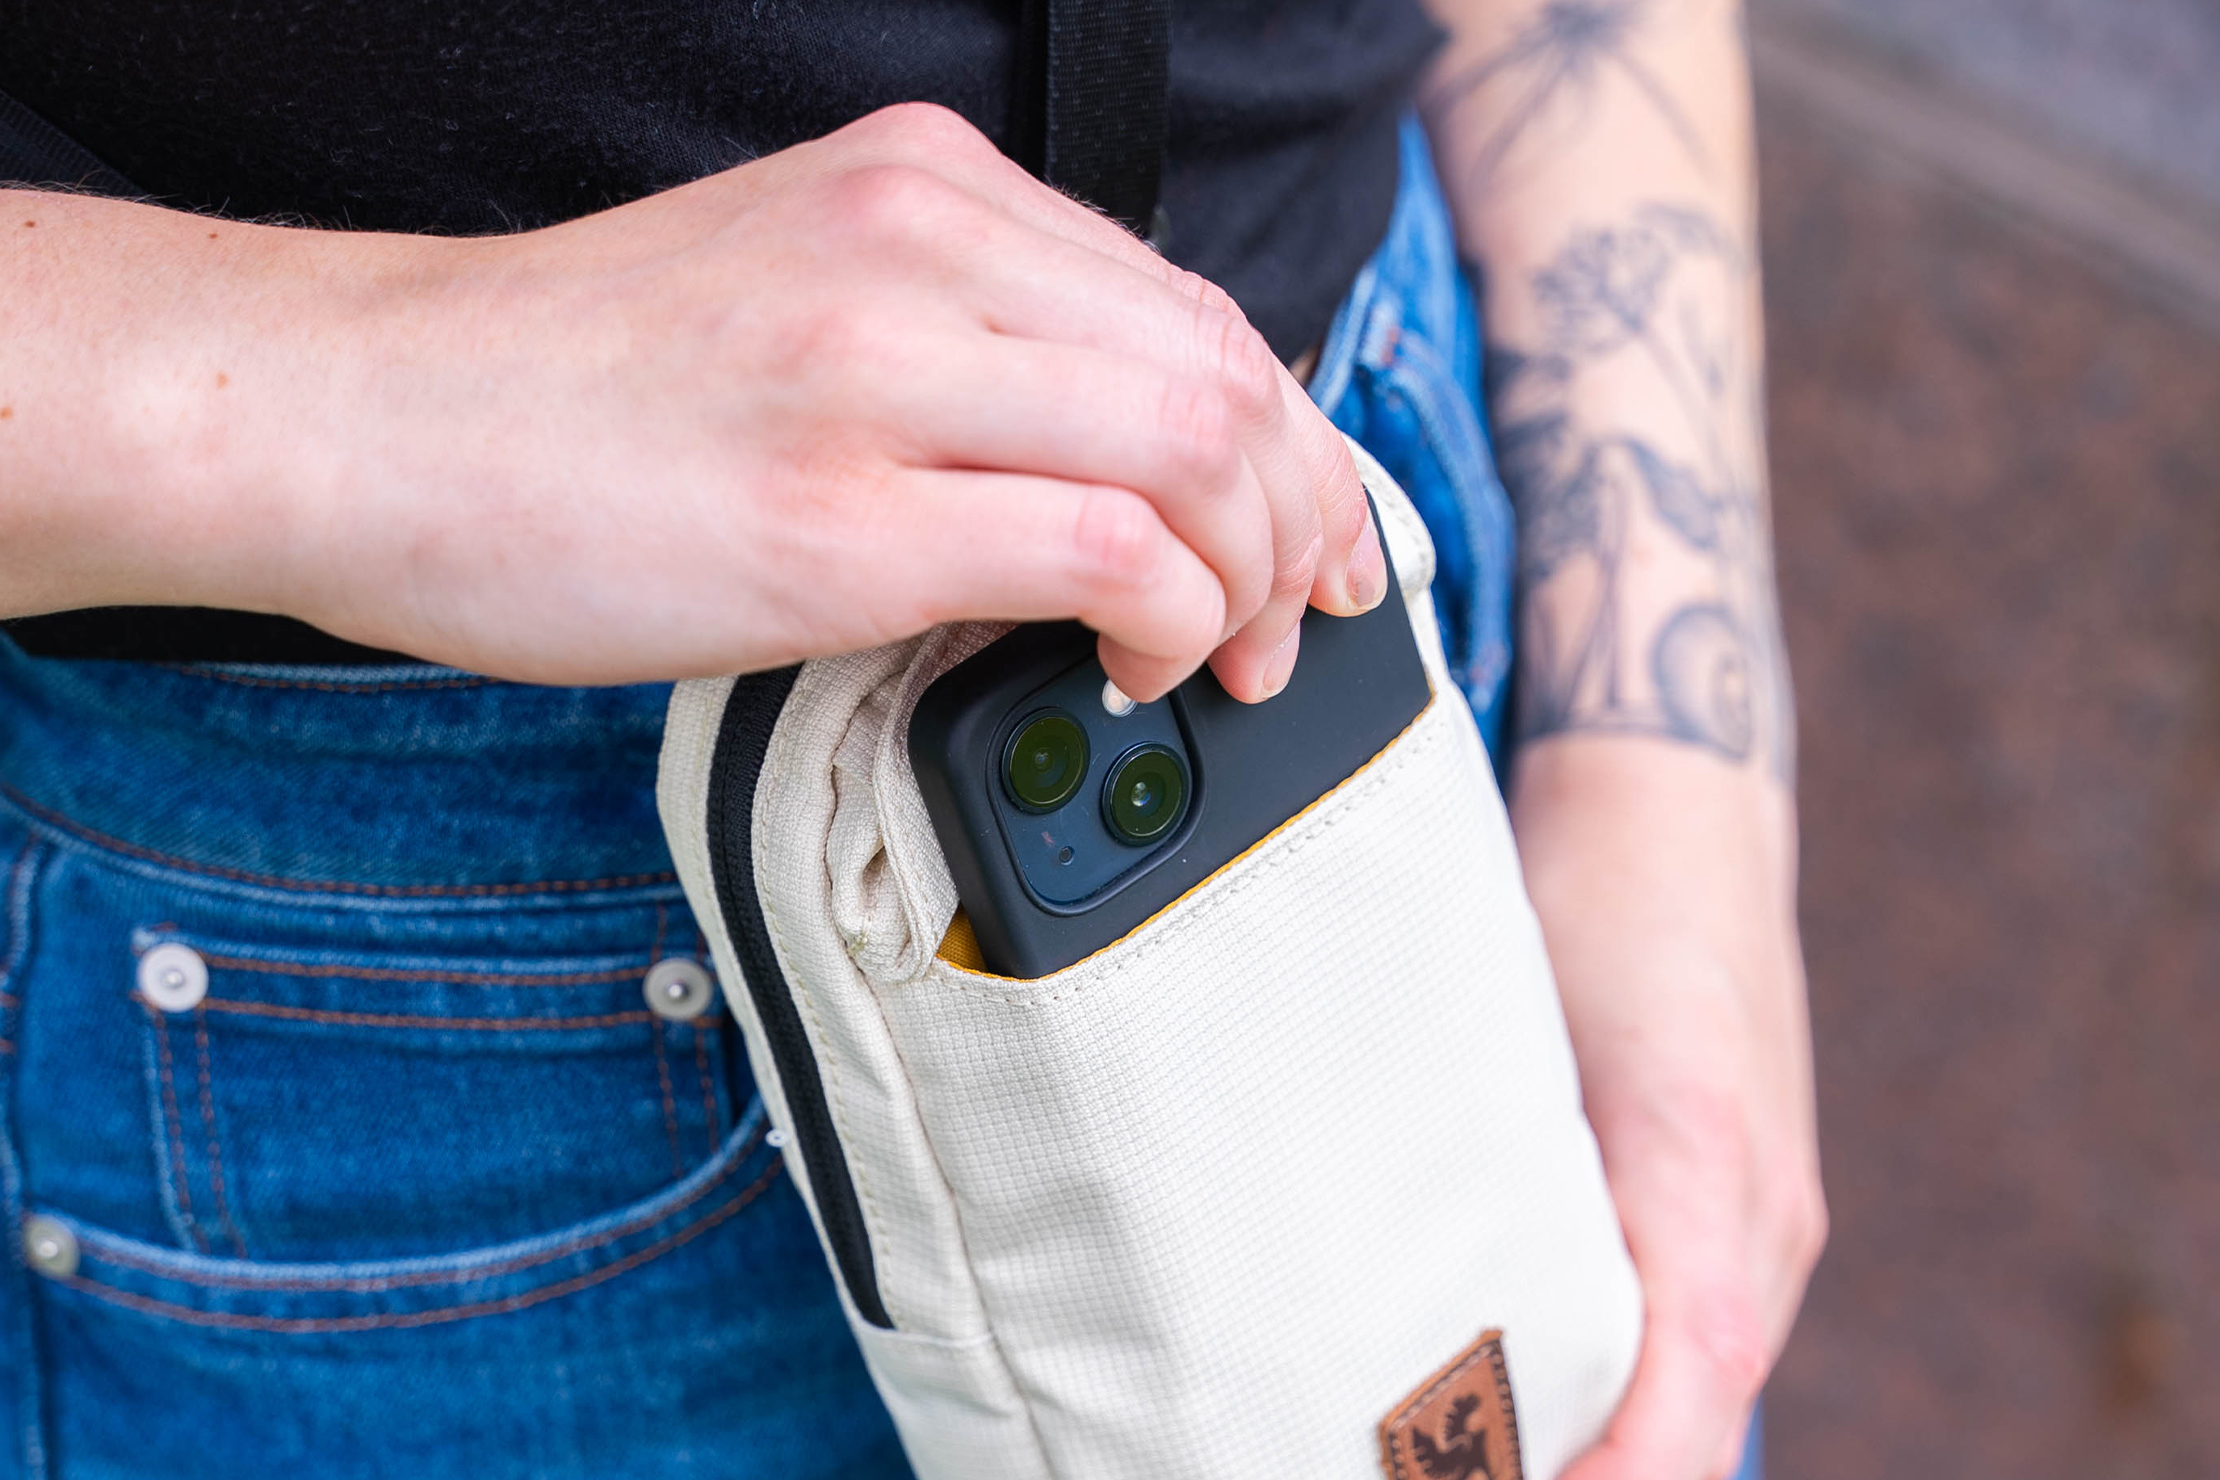 Chrome Industries Ruckas Accessory Pouch In Use